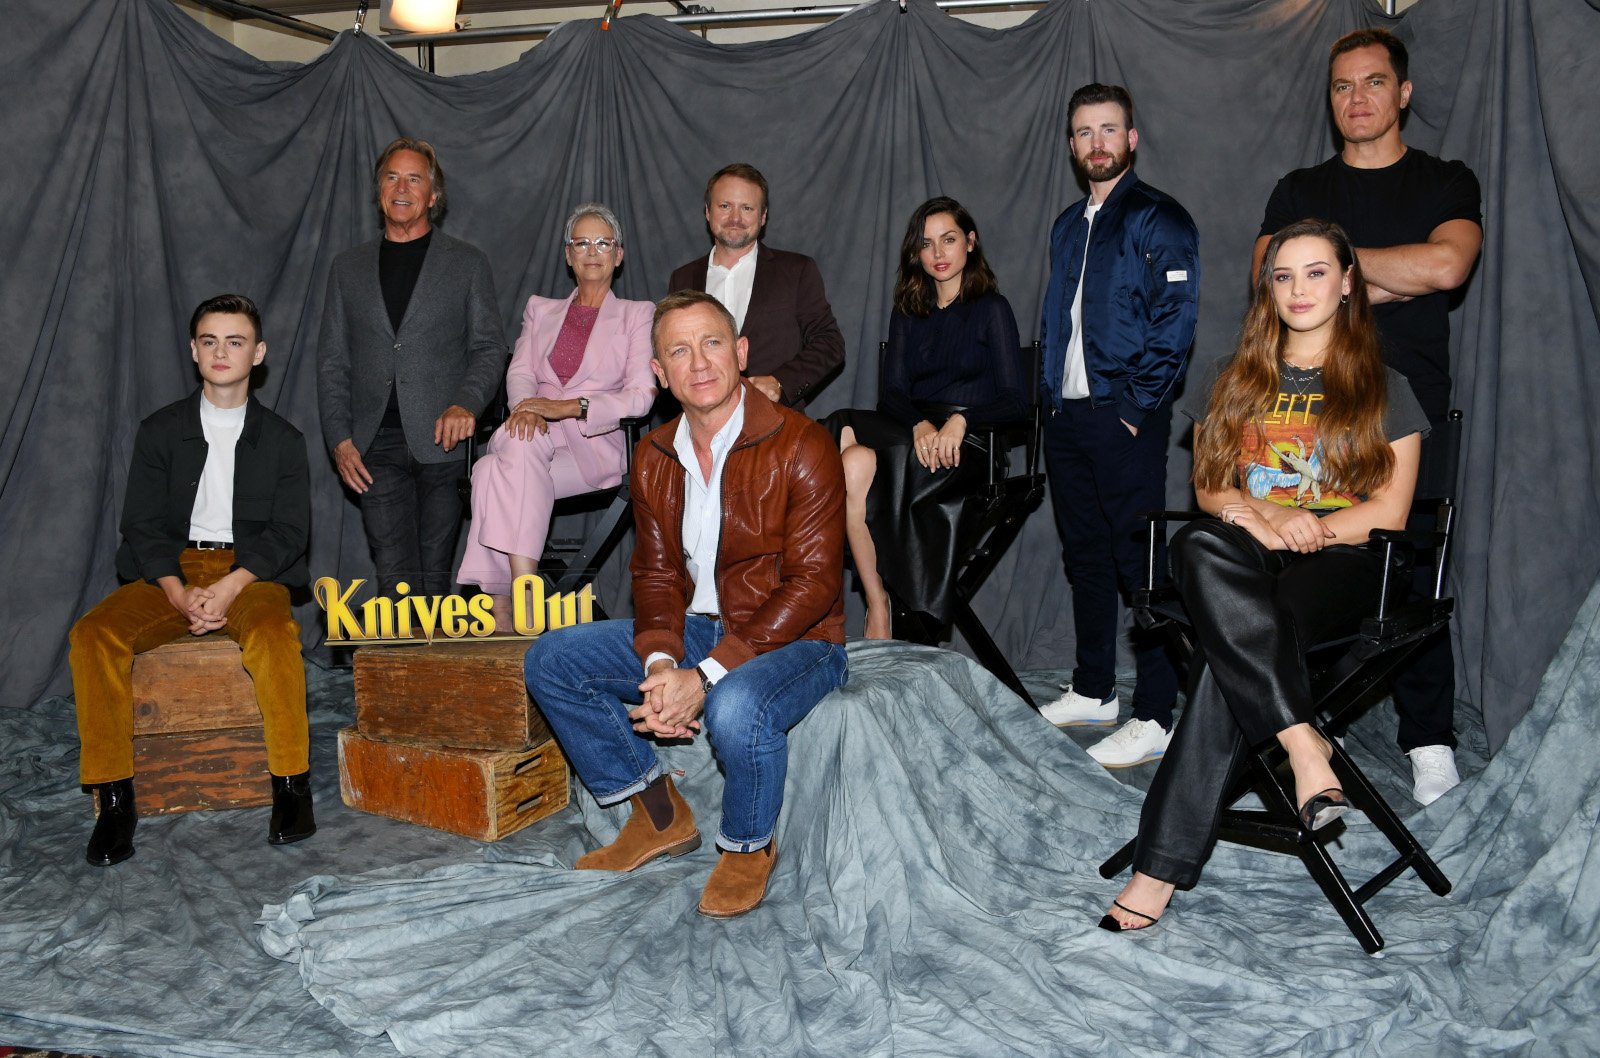 Jaeden Martell, Don Johnson, Jamie Lee Curtis, Rian Johnson, Daniel Craig, Chris Evans, Ana de Armas, Michael Shannon and Katherine Langford for our article about whether 'Knives Out' is on Netflix. They're posing next to a statue of the movie's logo.